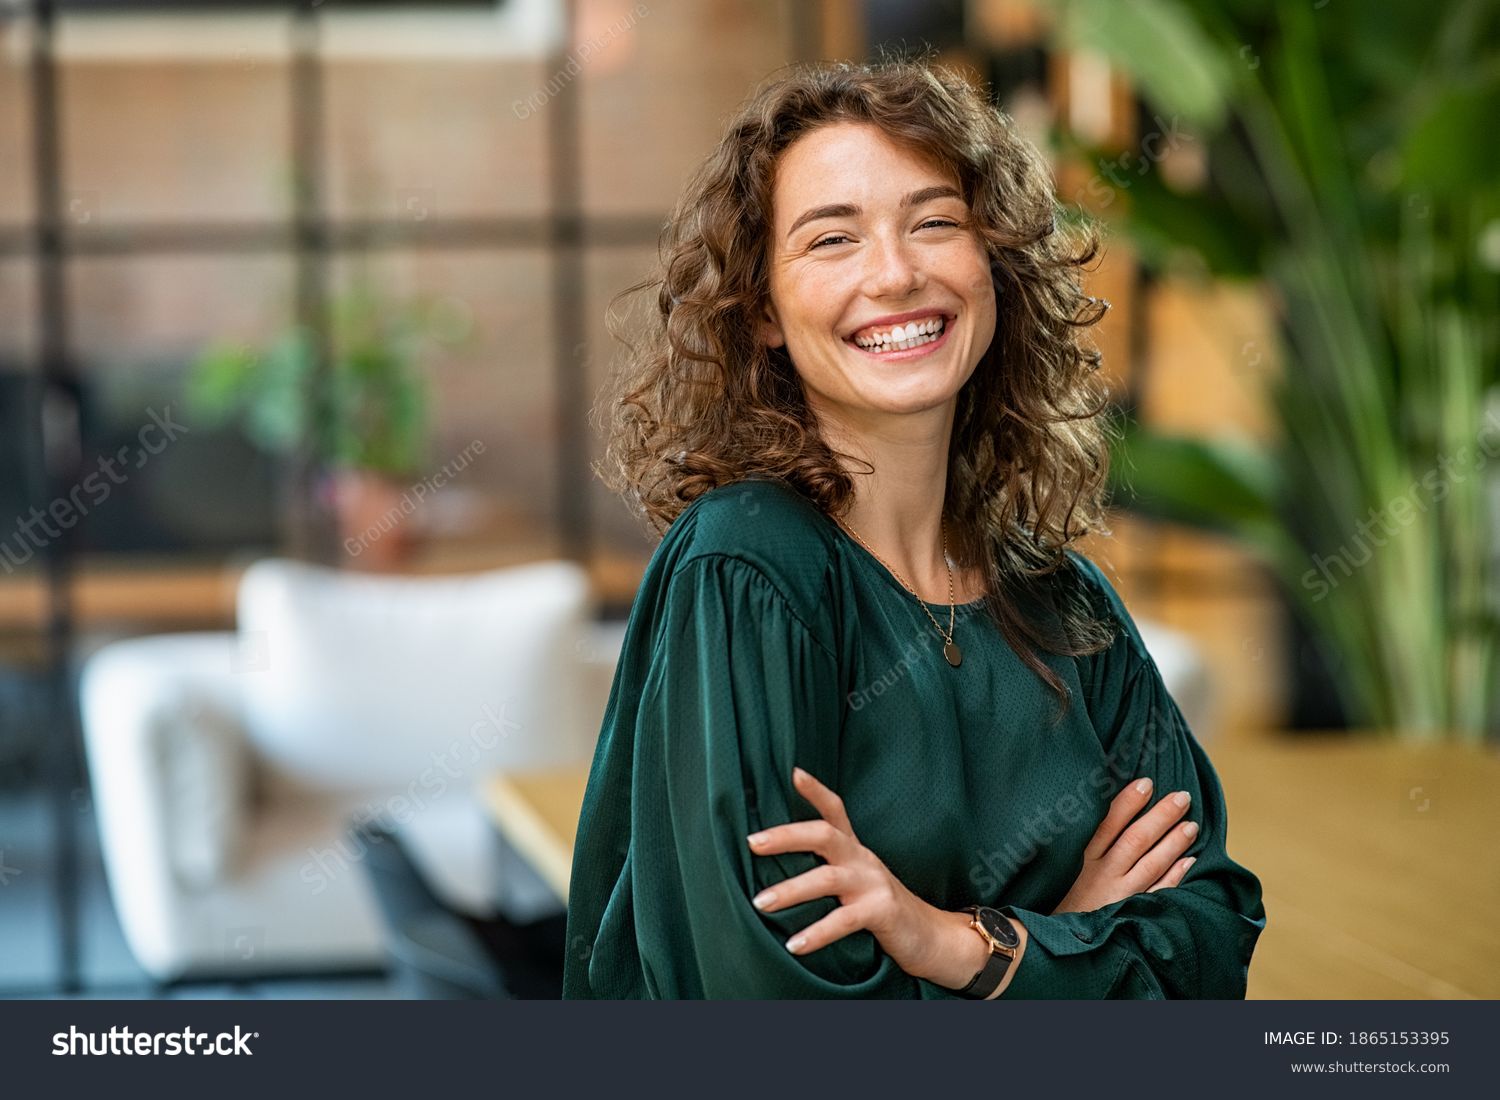 Stock-photo-portrait-of-young-smiling-woman-looking-at-camera-with-crossed-arms-happy-girl-standing-in-1865153395.jpg